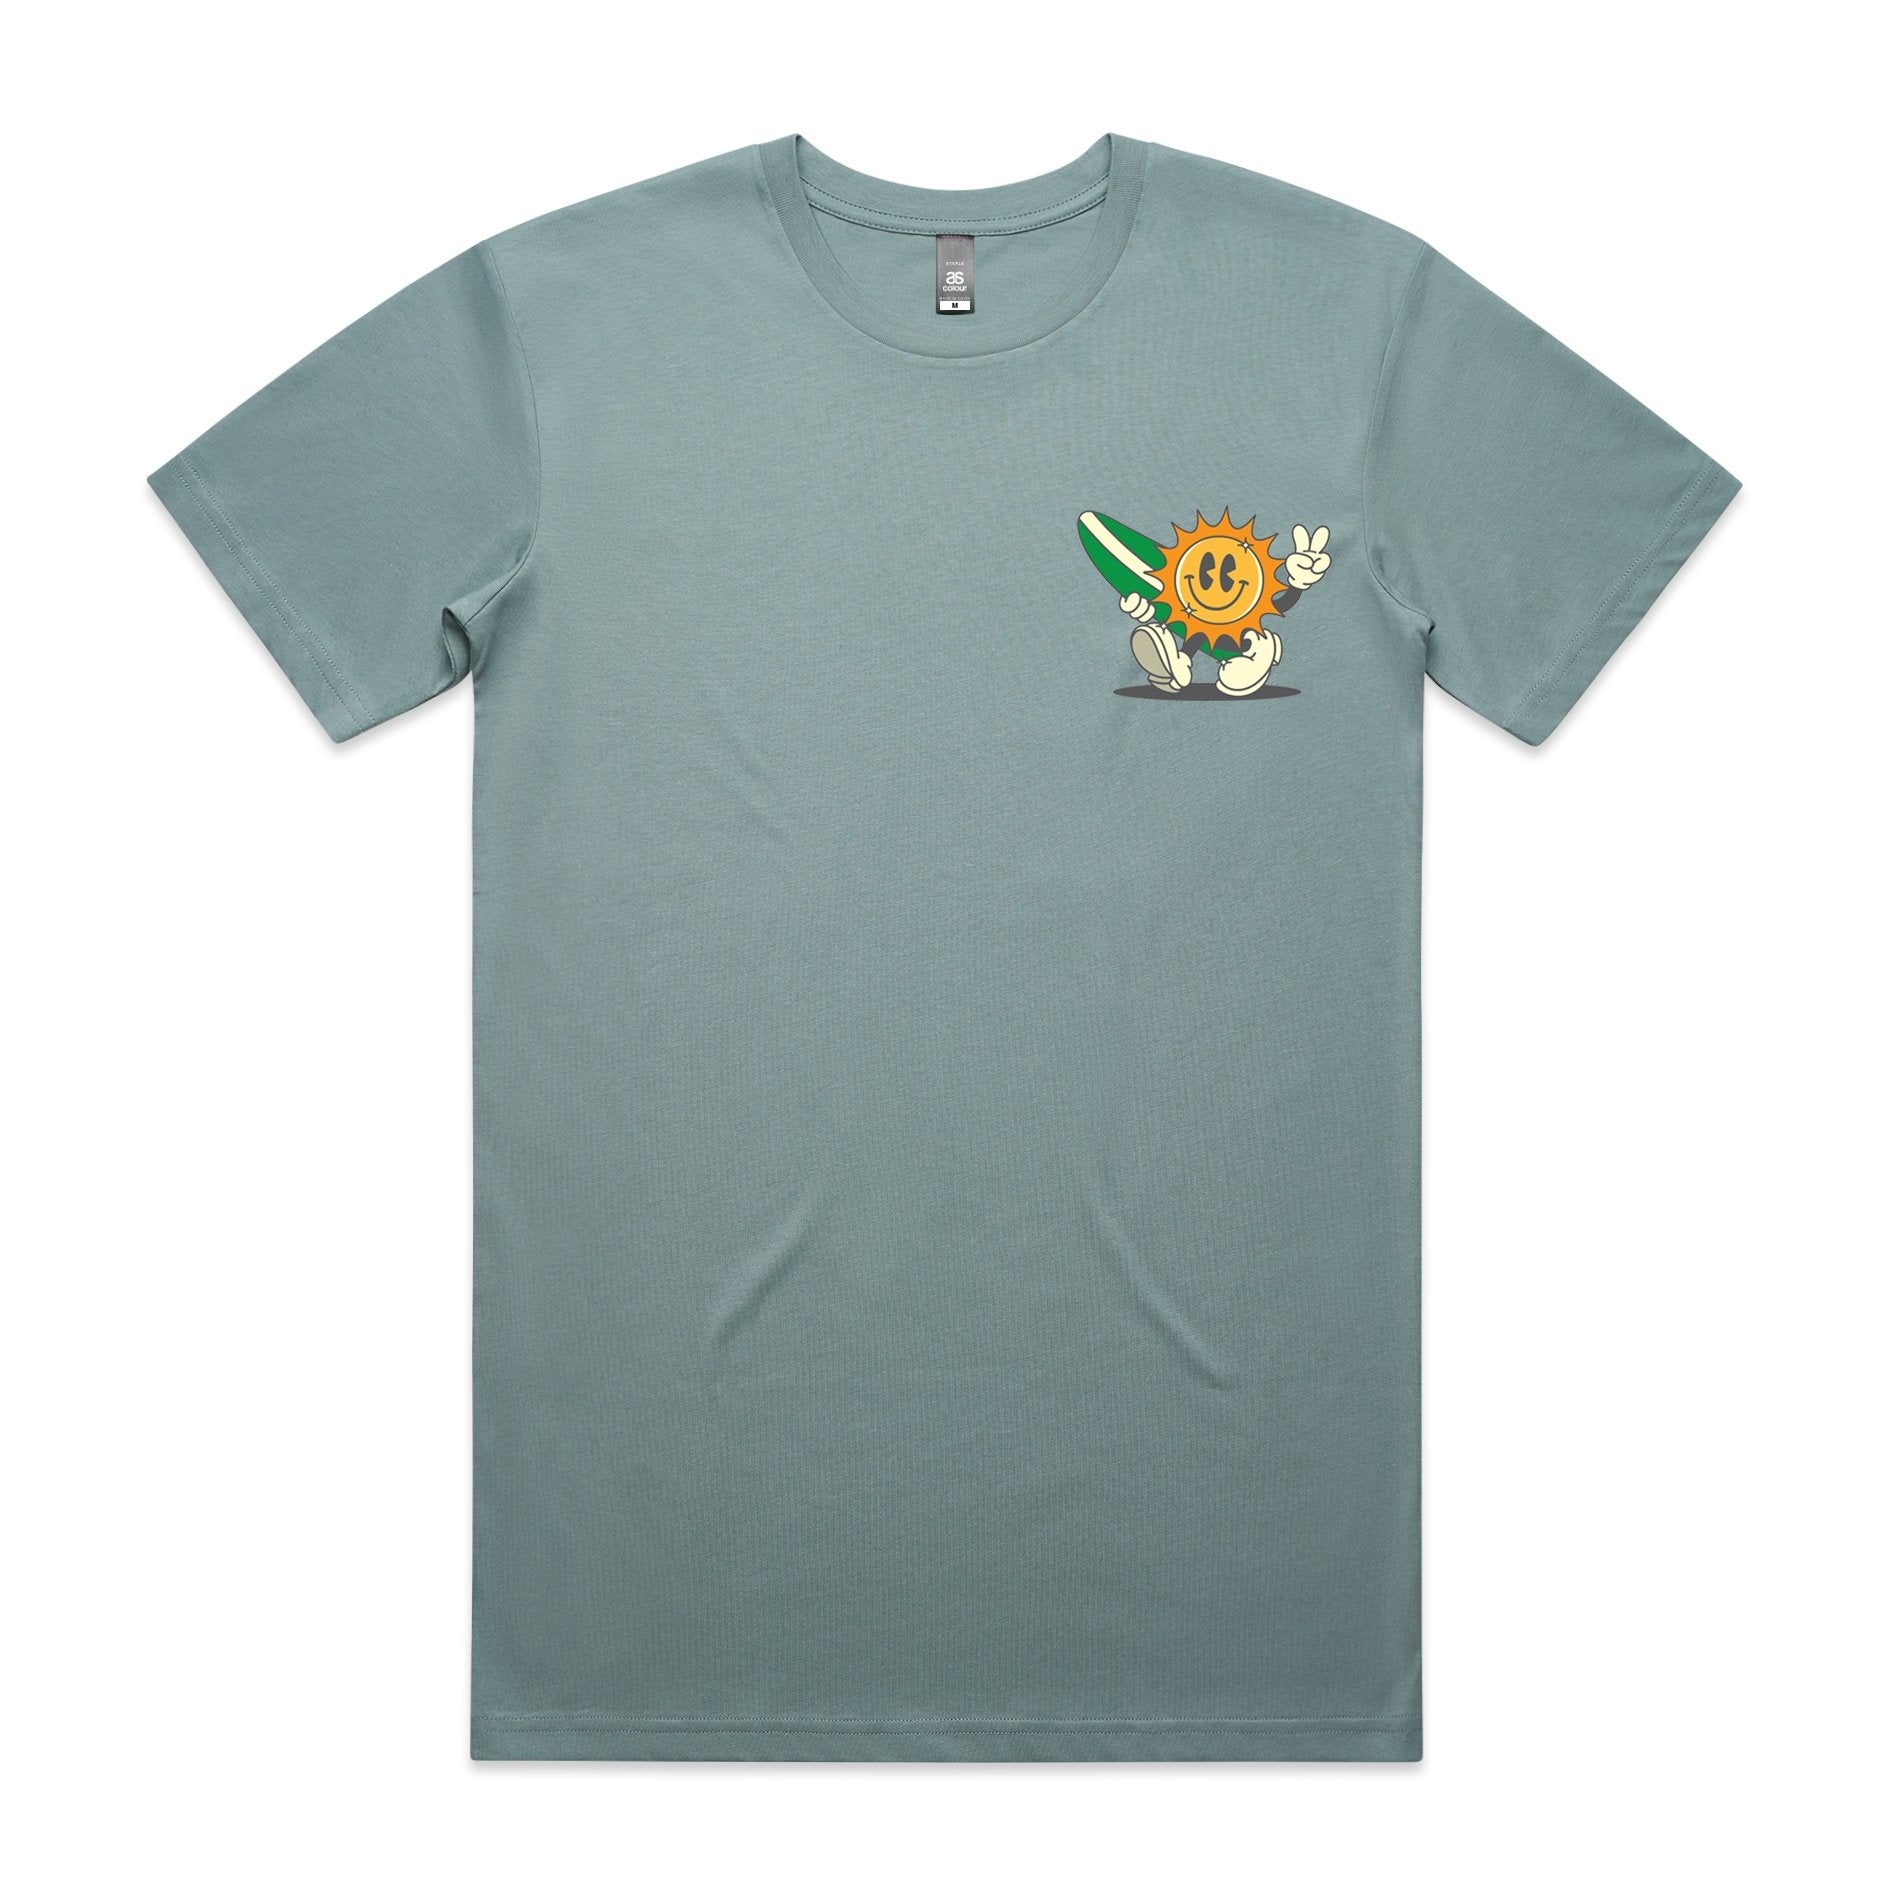 PRESALE Create Your Own Sunshine Tee - LACO Gives